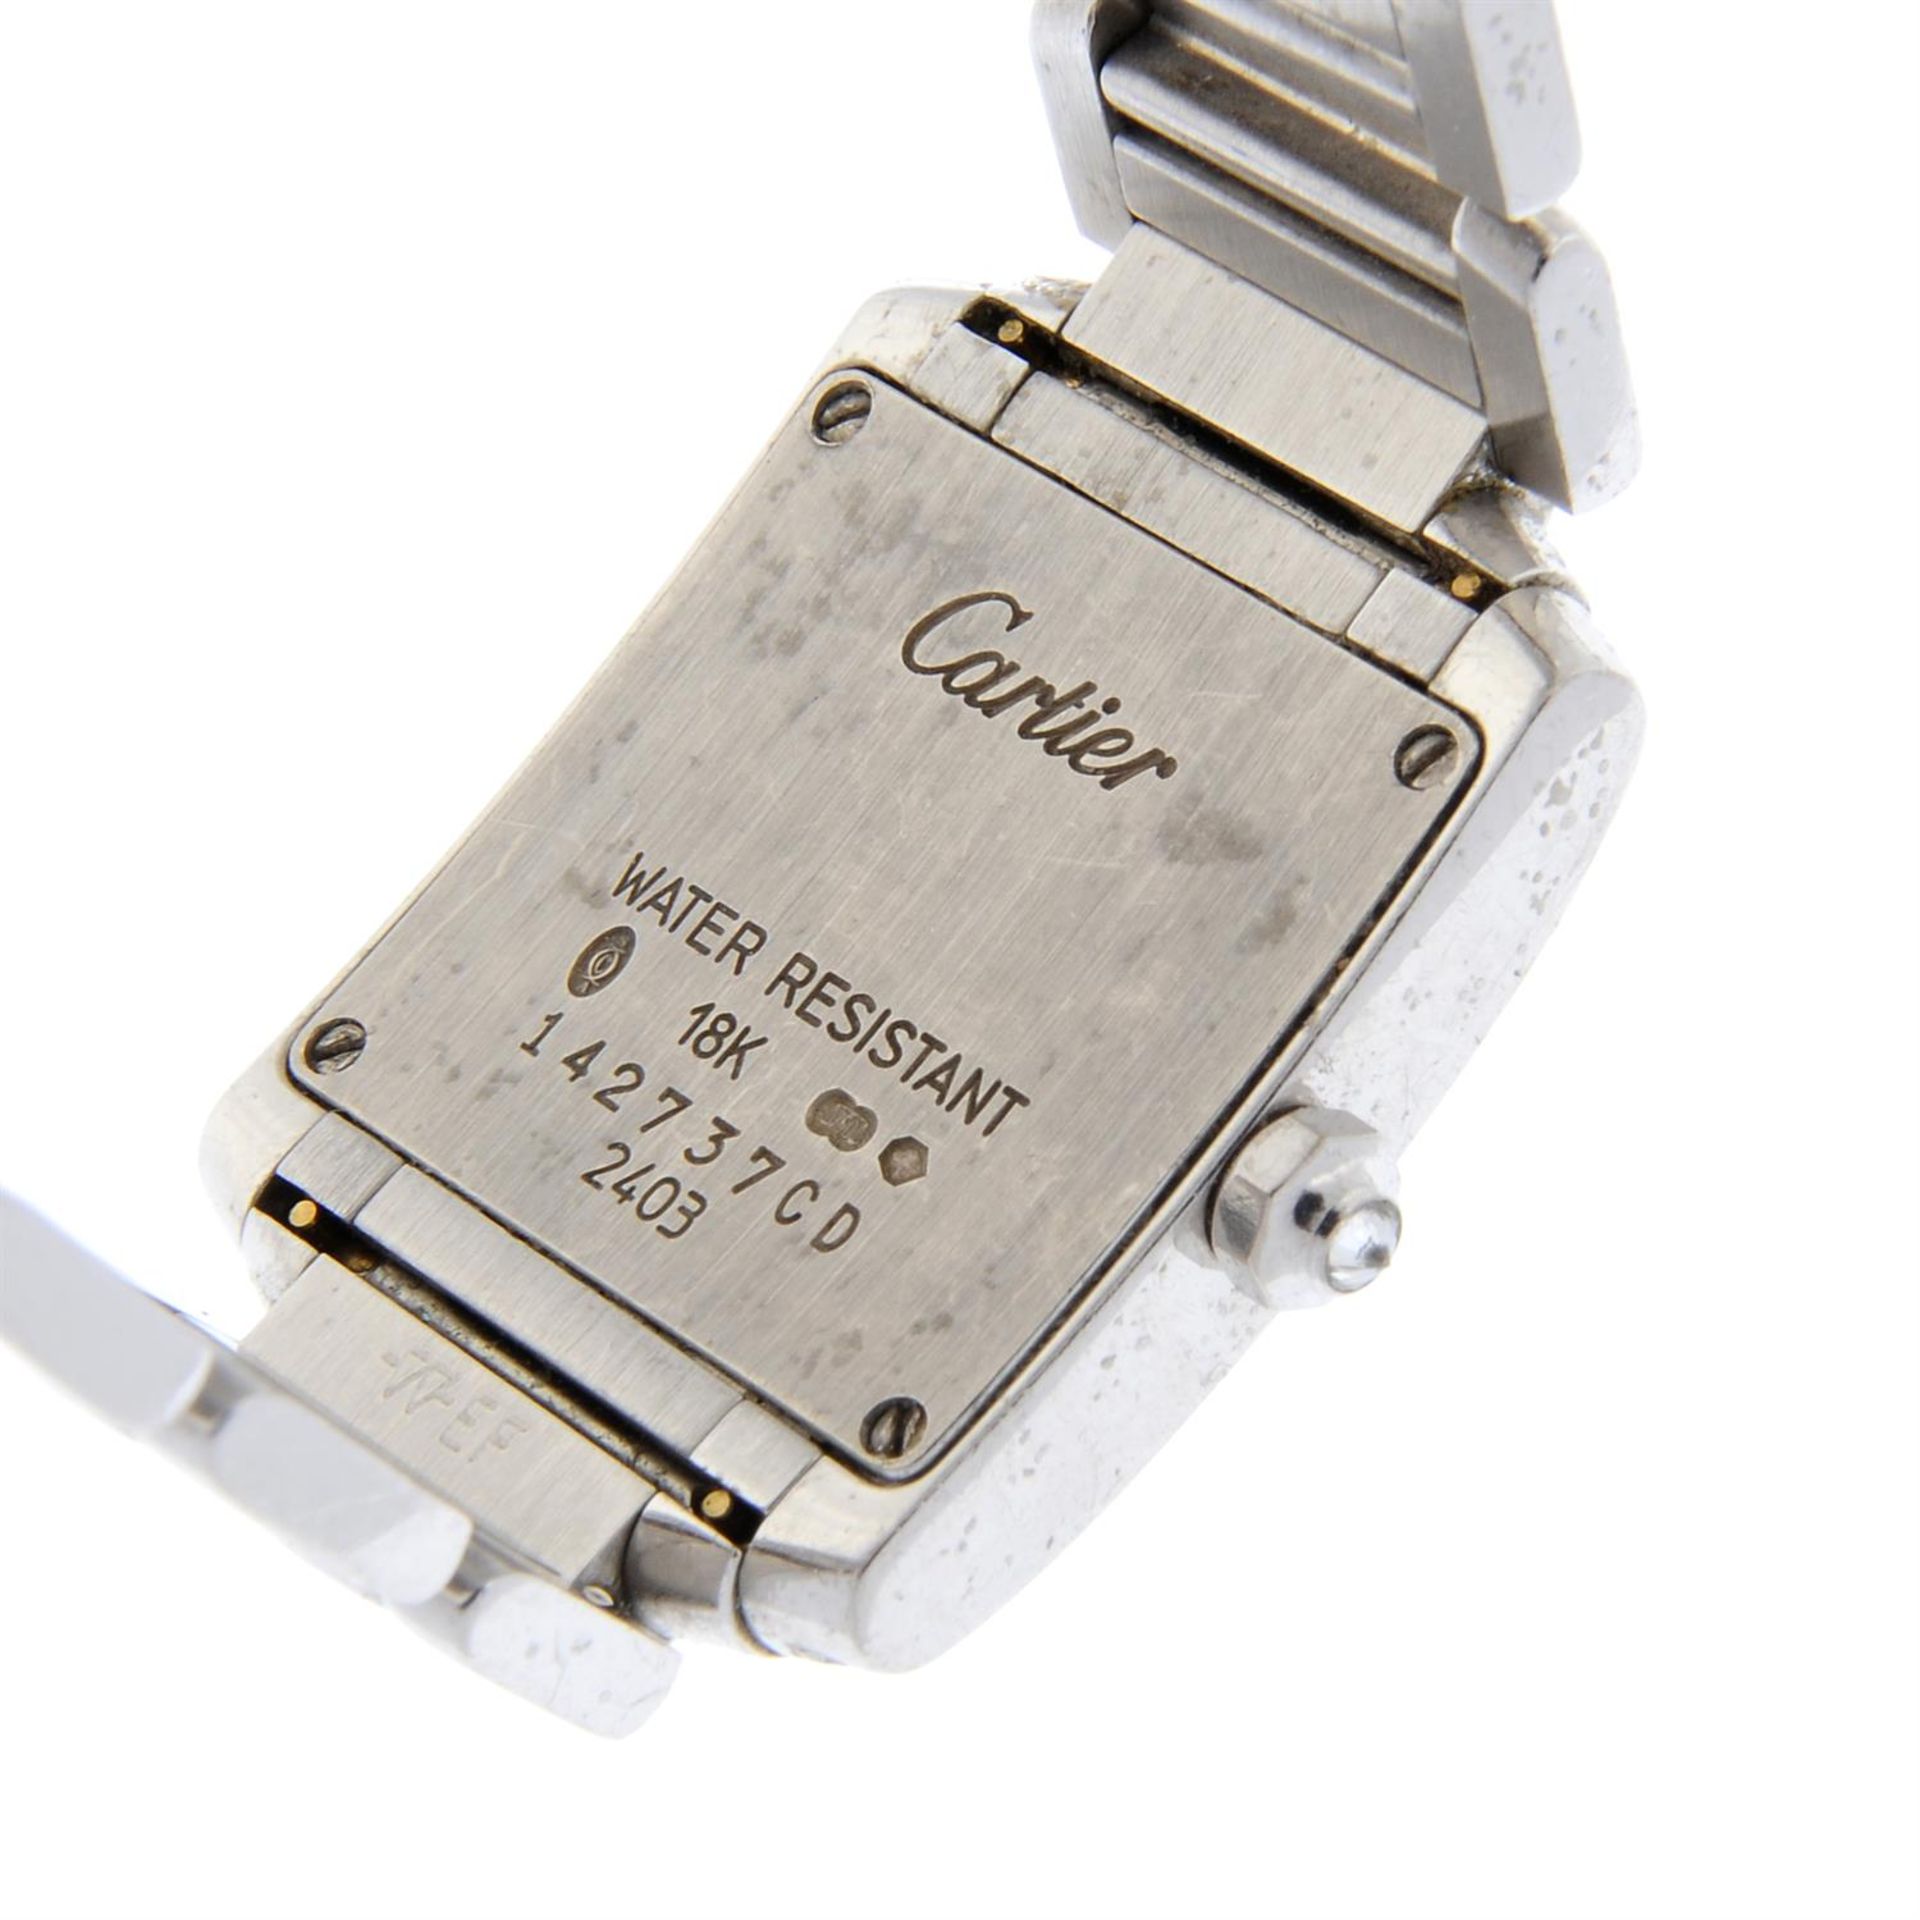 CARTIER - an 18ct white gold Tank Francaise bracelet watch, 20mm. - Image 5 of 6